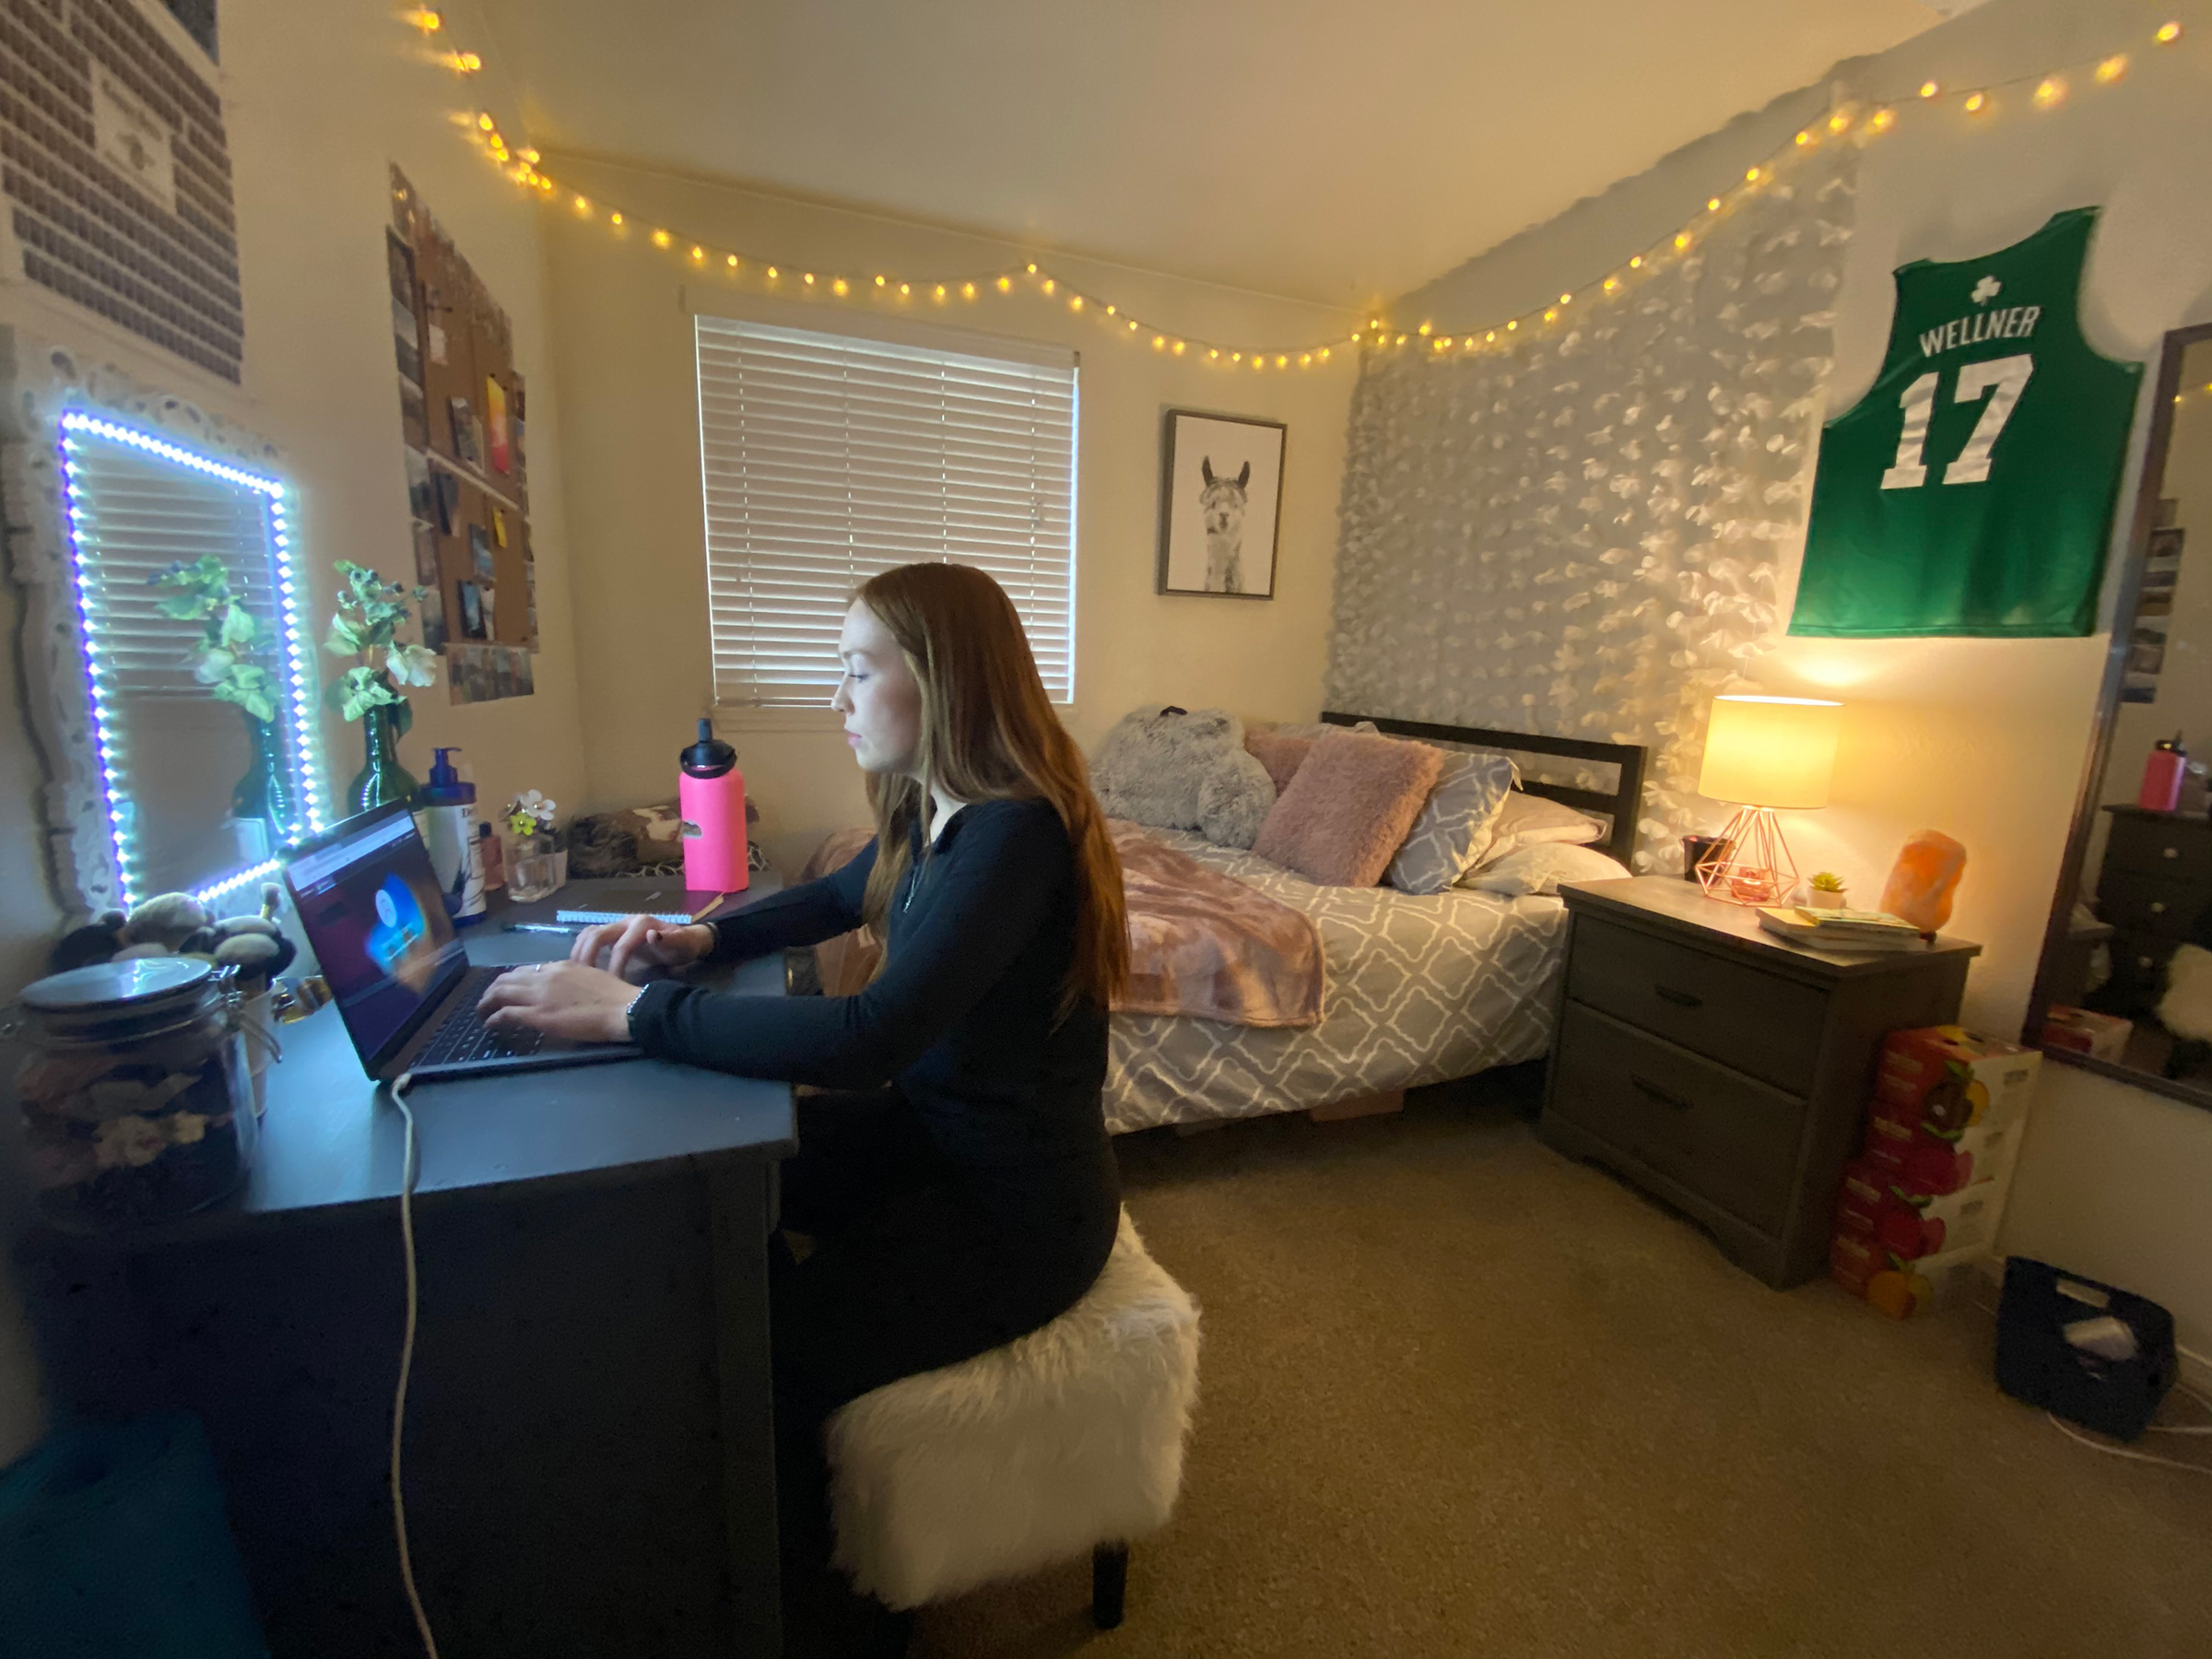 Molly Wellner, a student at Washington State University in Pullman, Wash., at her desk in her off-campus housing. Wellner and her roommates all tested positive for COVID-19 this fall